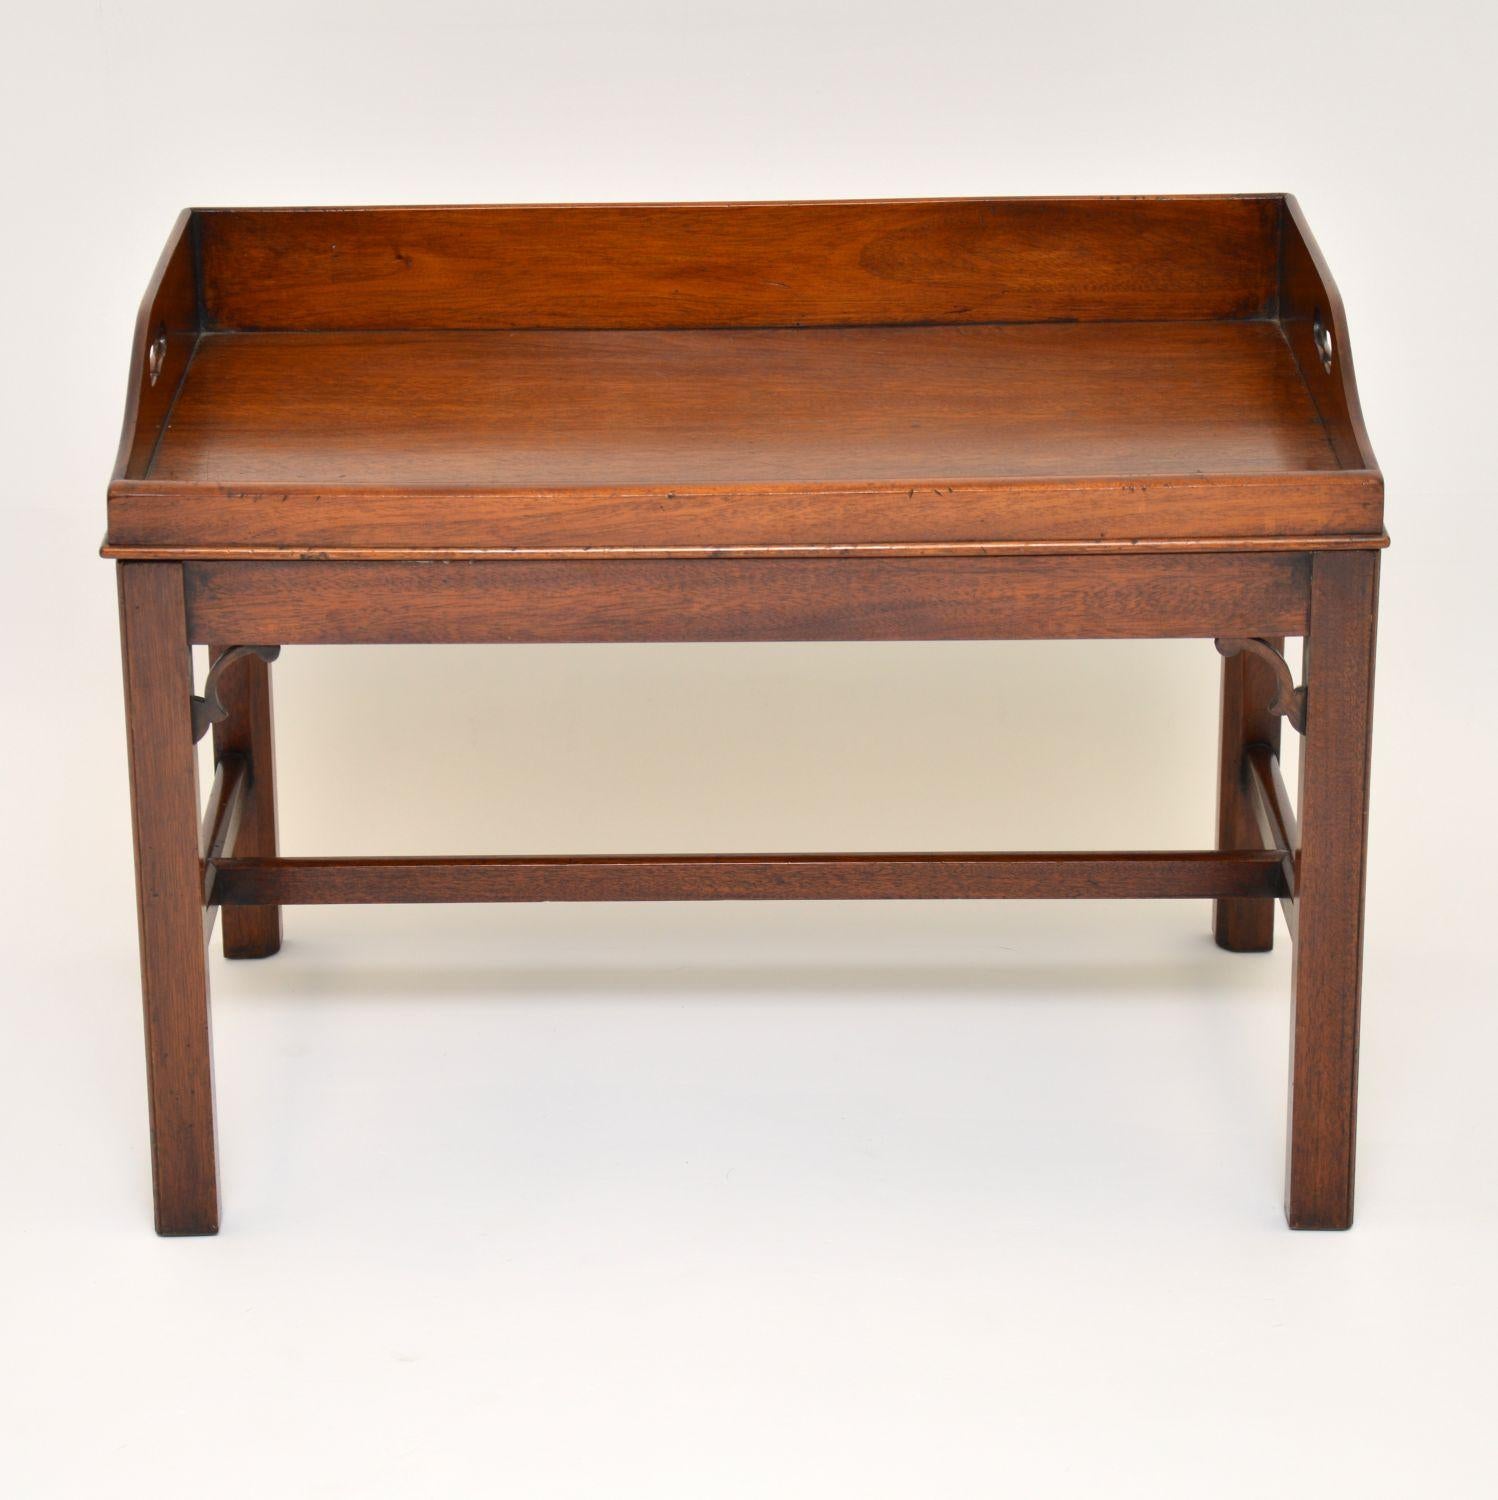 Antique mahogany Chippendale style tray top coffee table dating from circa 1890-1910 period and in excellent condition. The top tray section just lifts off from the base, so could be used for carrying items on. It sits on a strong base section with